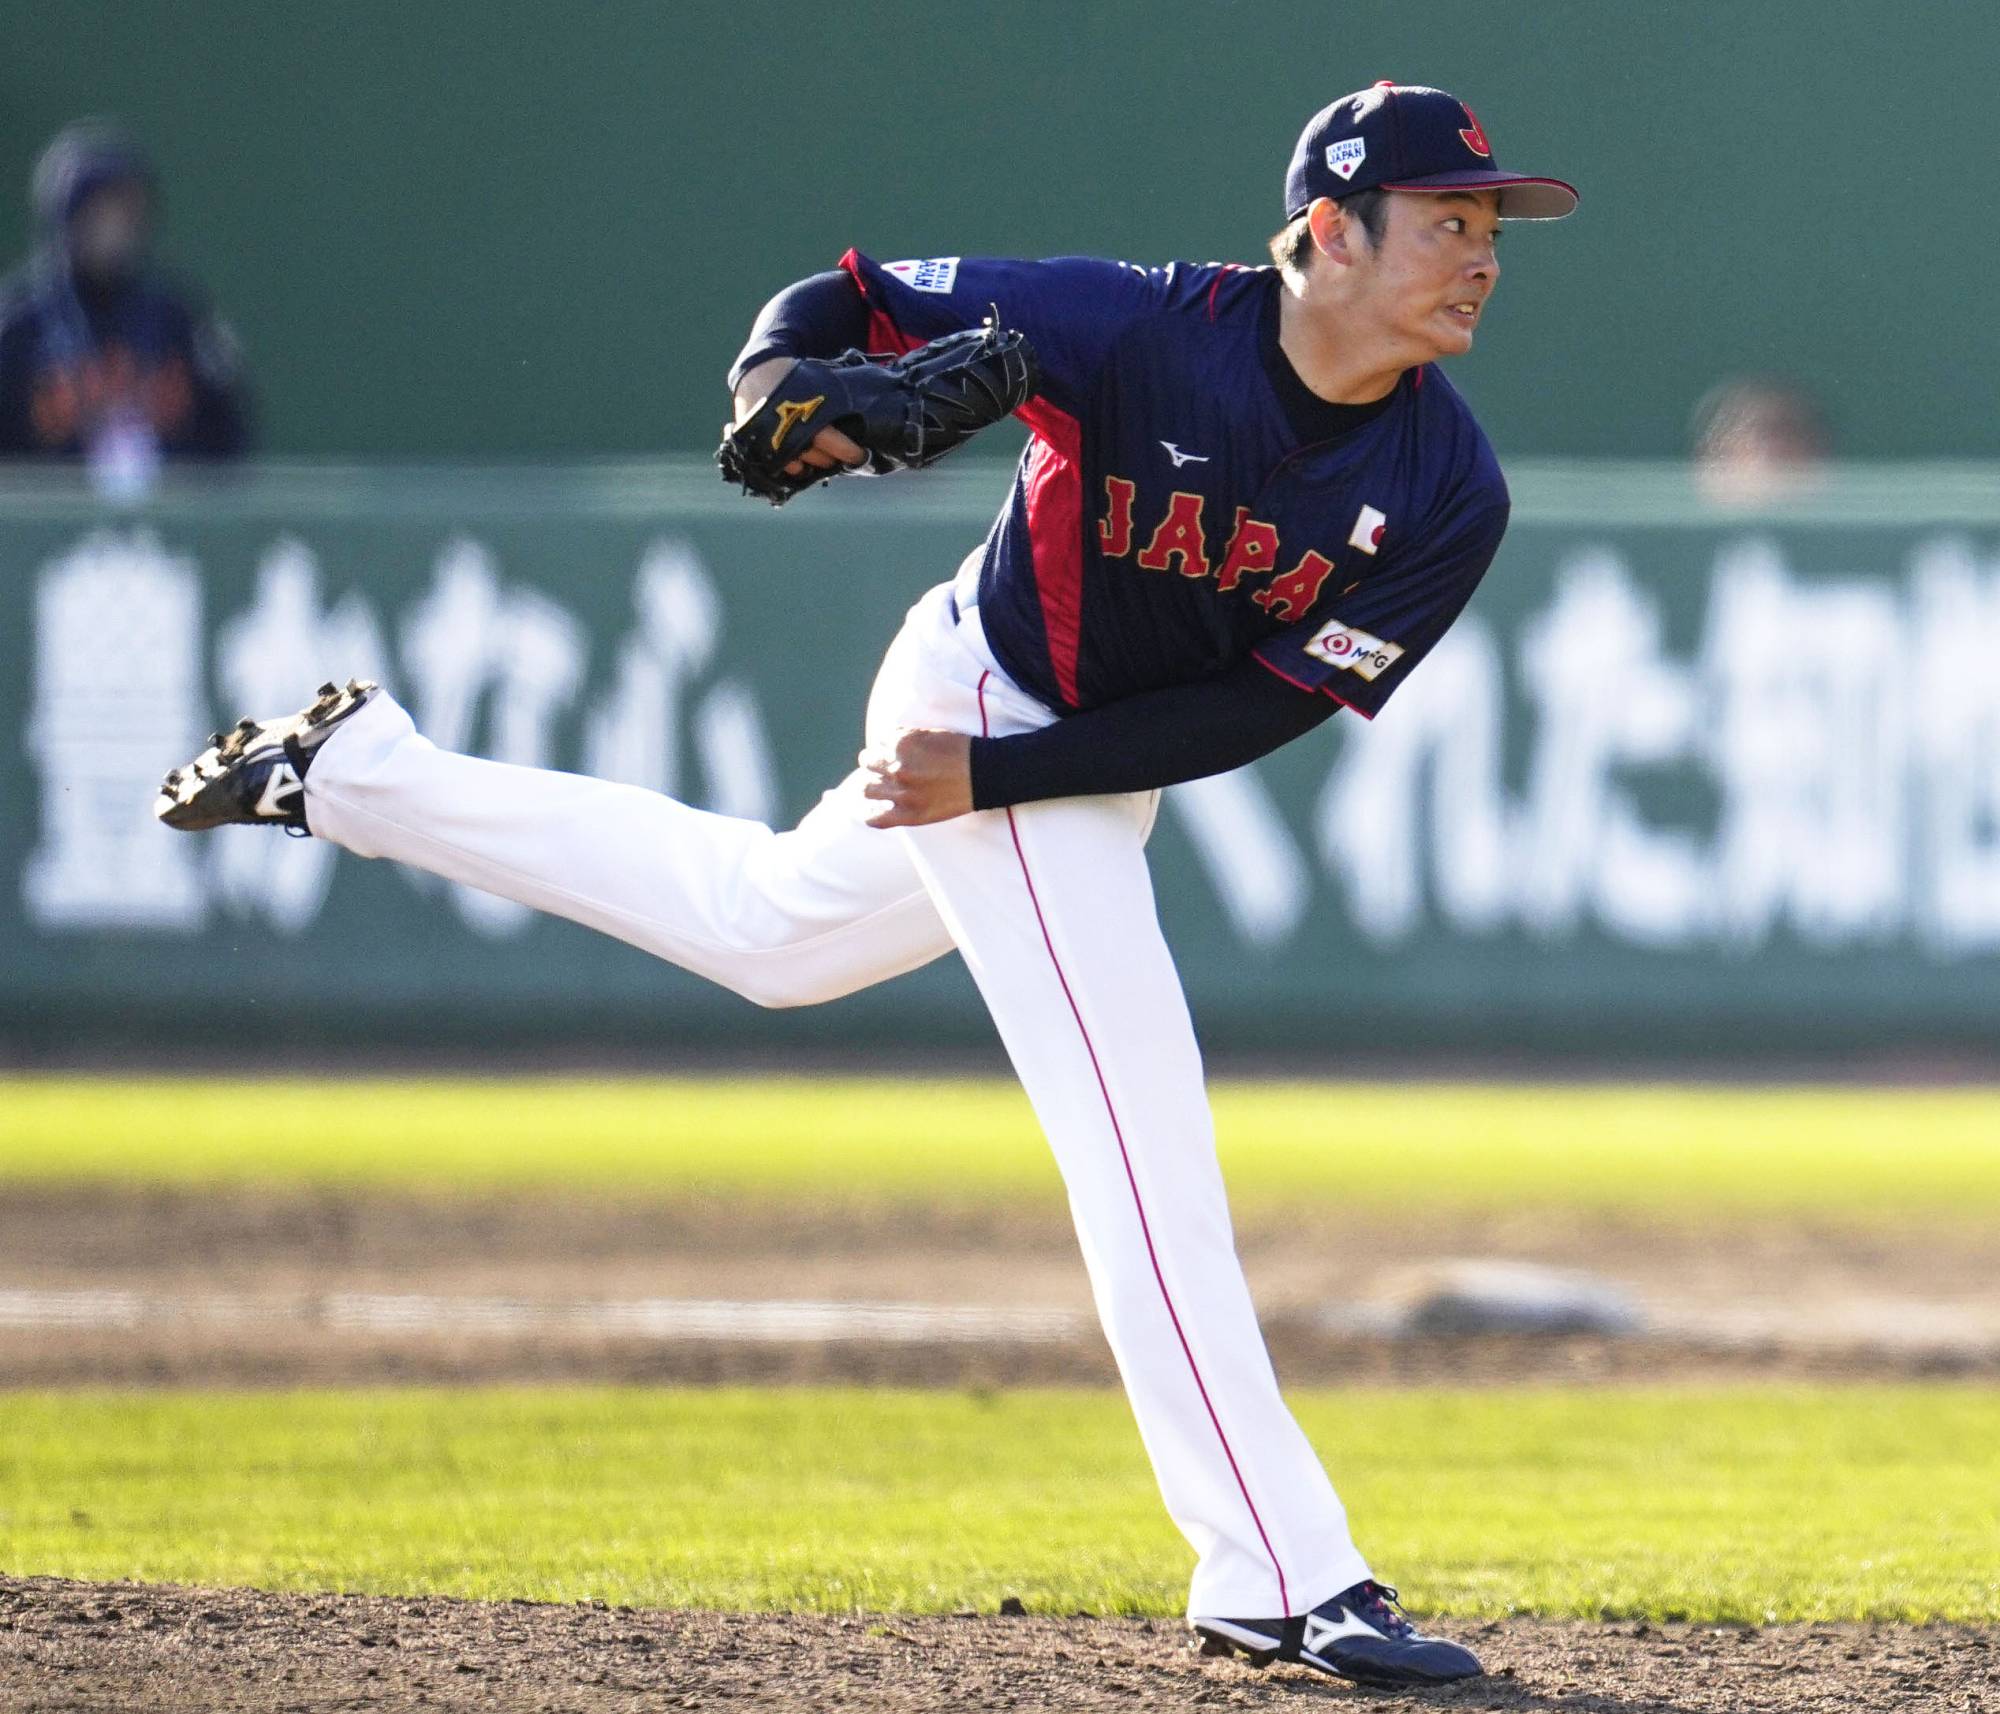  MLB - Japanese hurlers have come up short